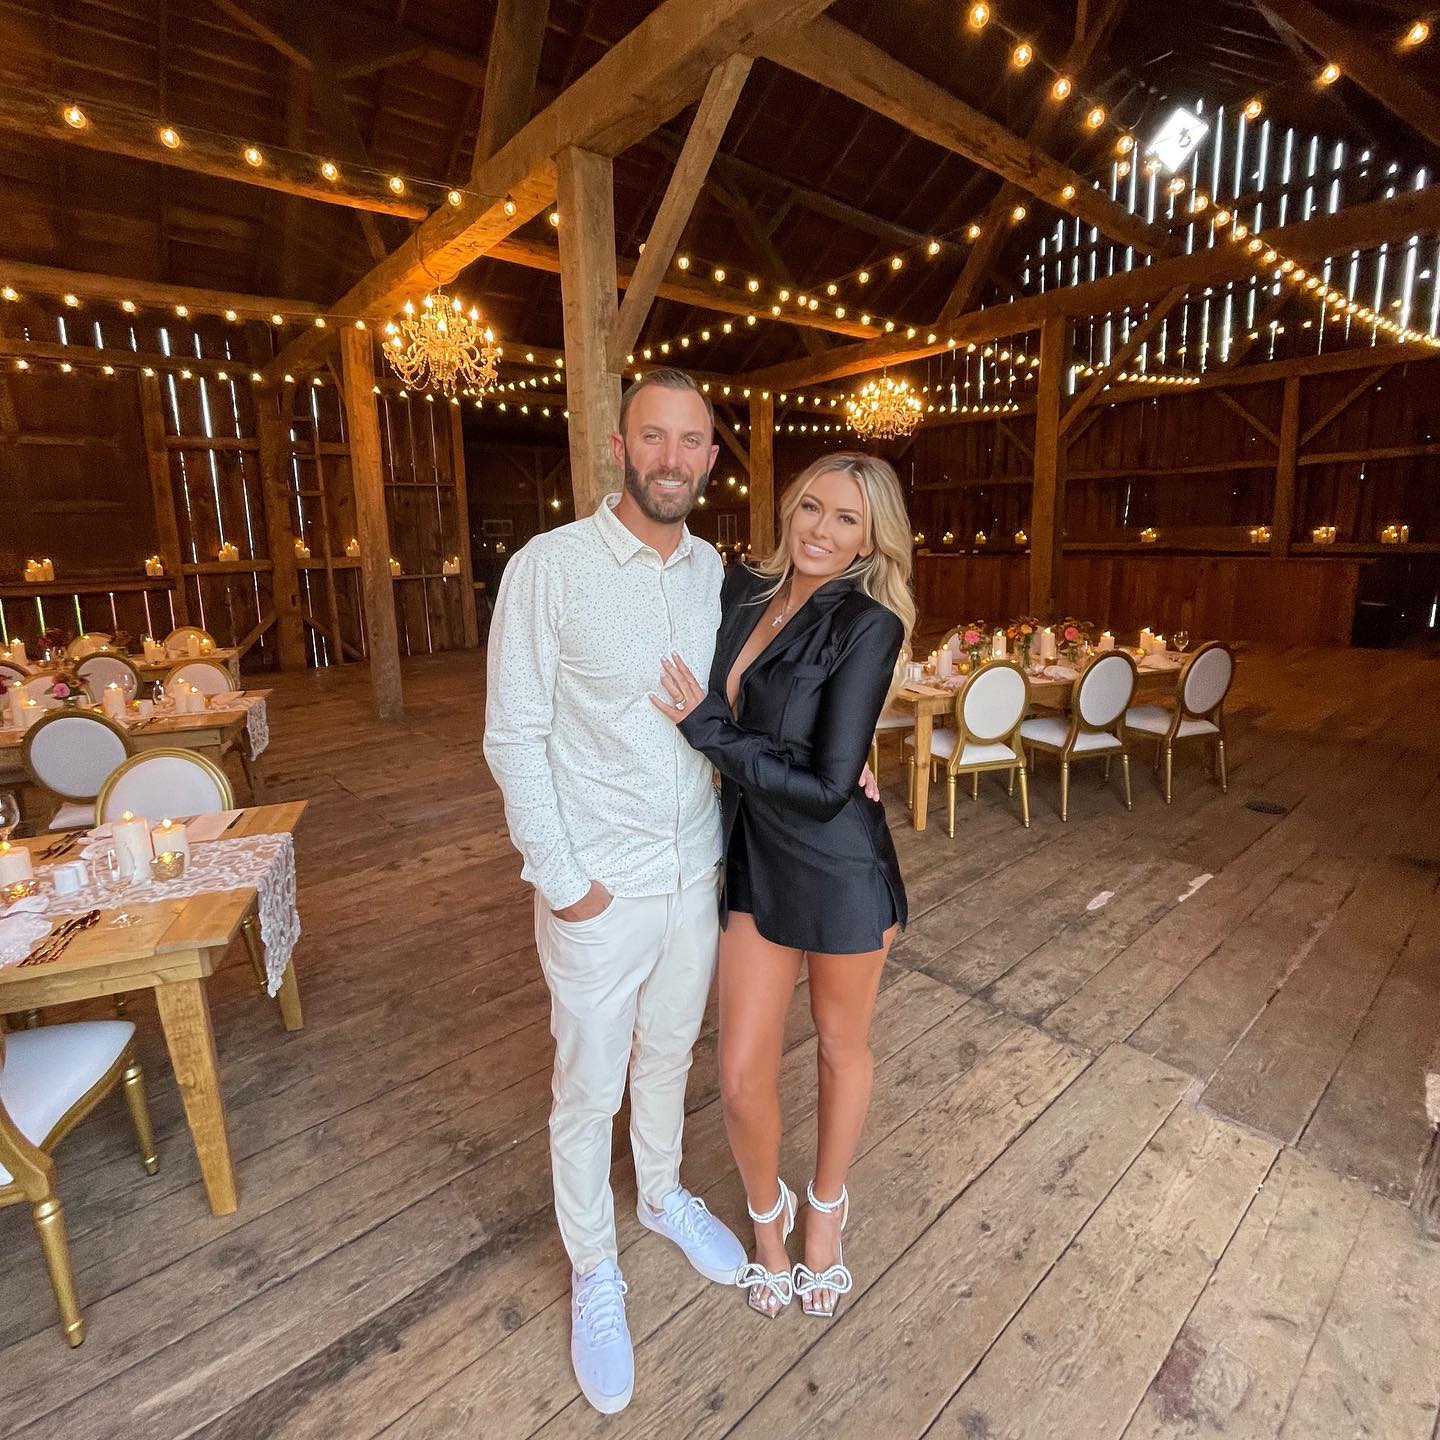 , Paulina Gretzky reveals dad Wayne’s first impression of Dustin Johnson before marrying LIV golf star